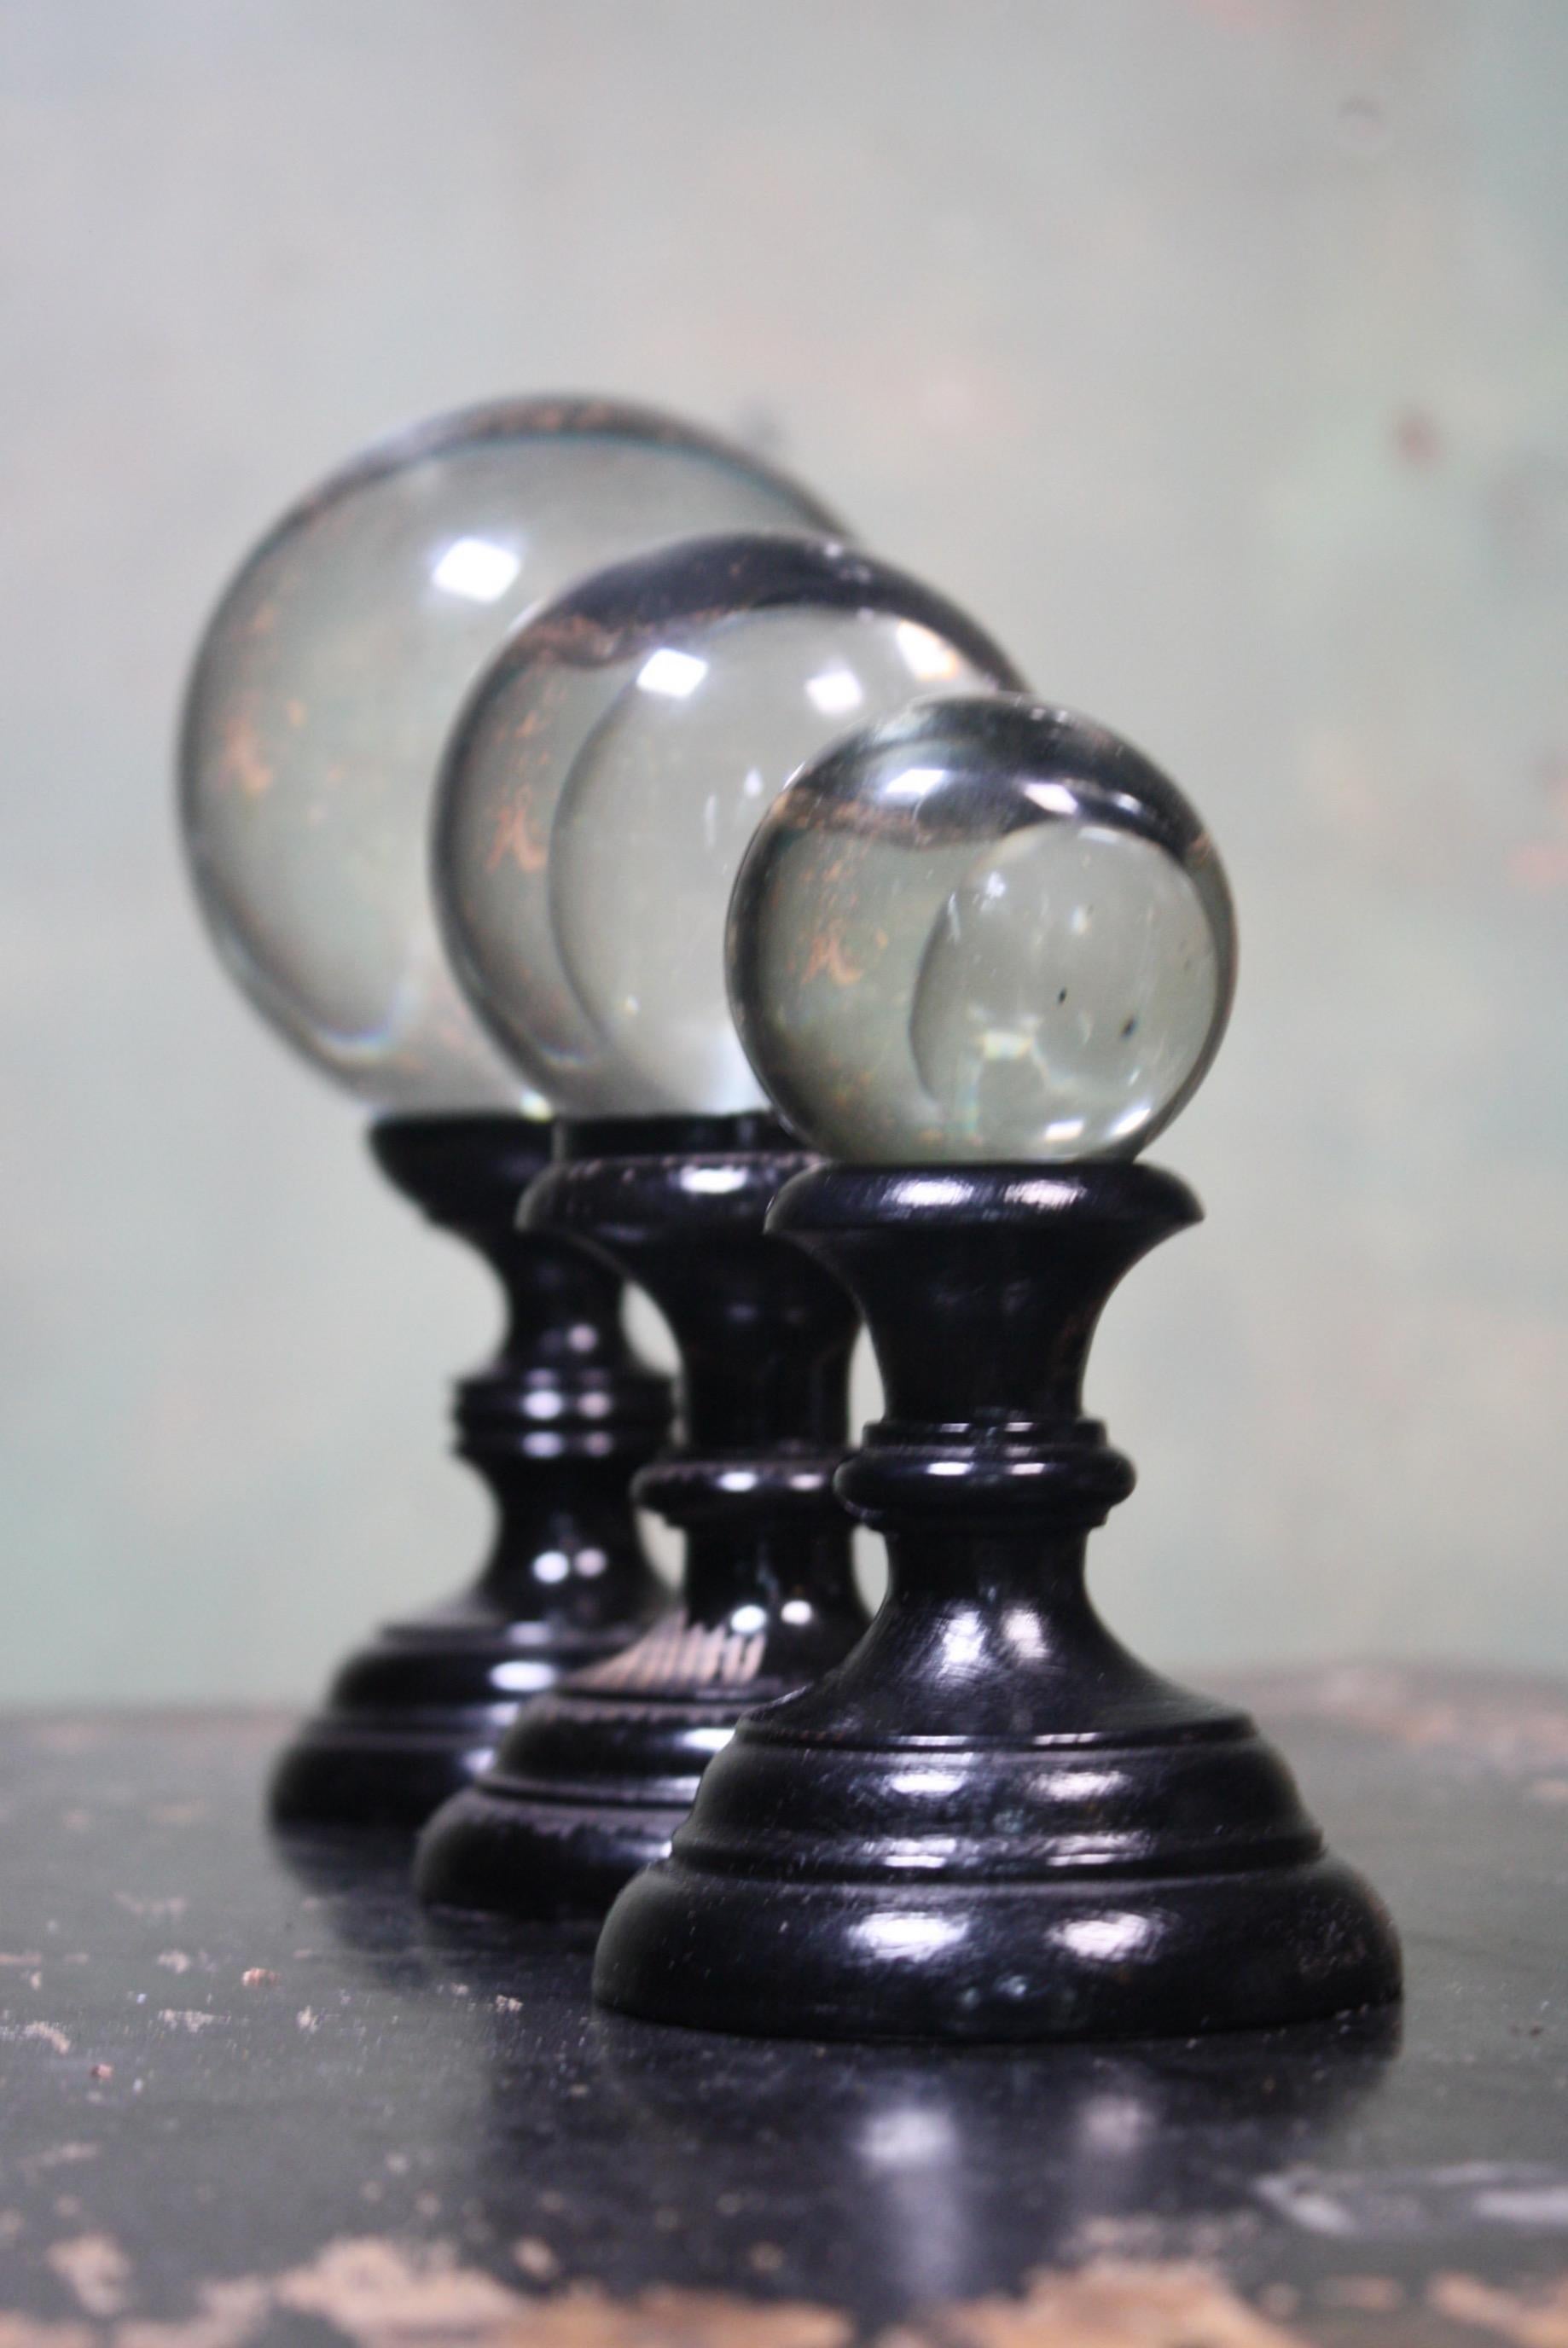 A trio of early 20th century glass optical spheres, on ebonized stands.

The smallest of the three stands is a later replacement, all the glass globes are in great order no chips or bruising, very minimal surface wear if any. The two original